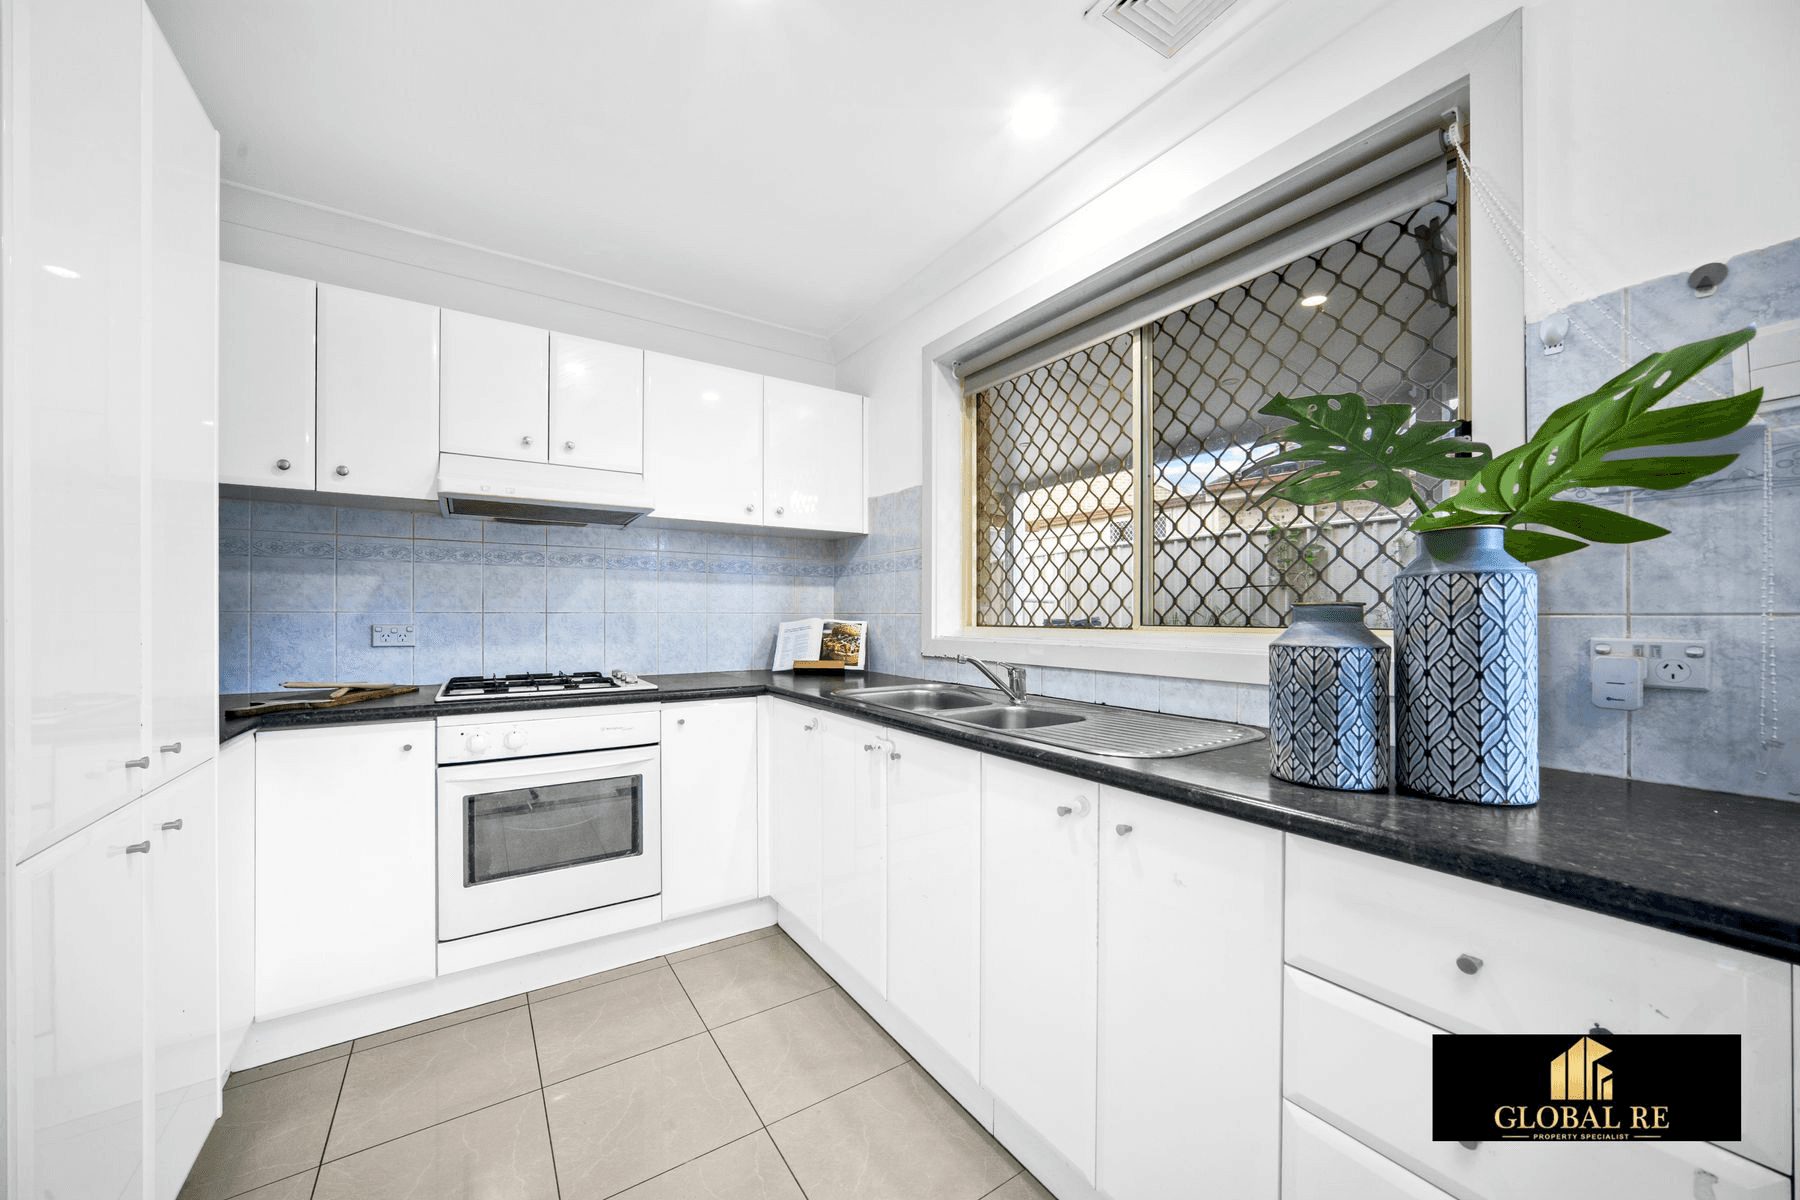 3/150 North Liverpool Road, GREEN VALLEY, NSW 2168